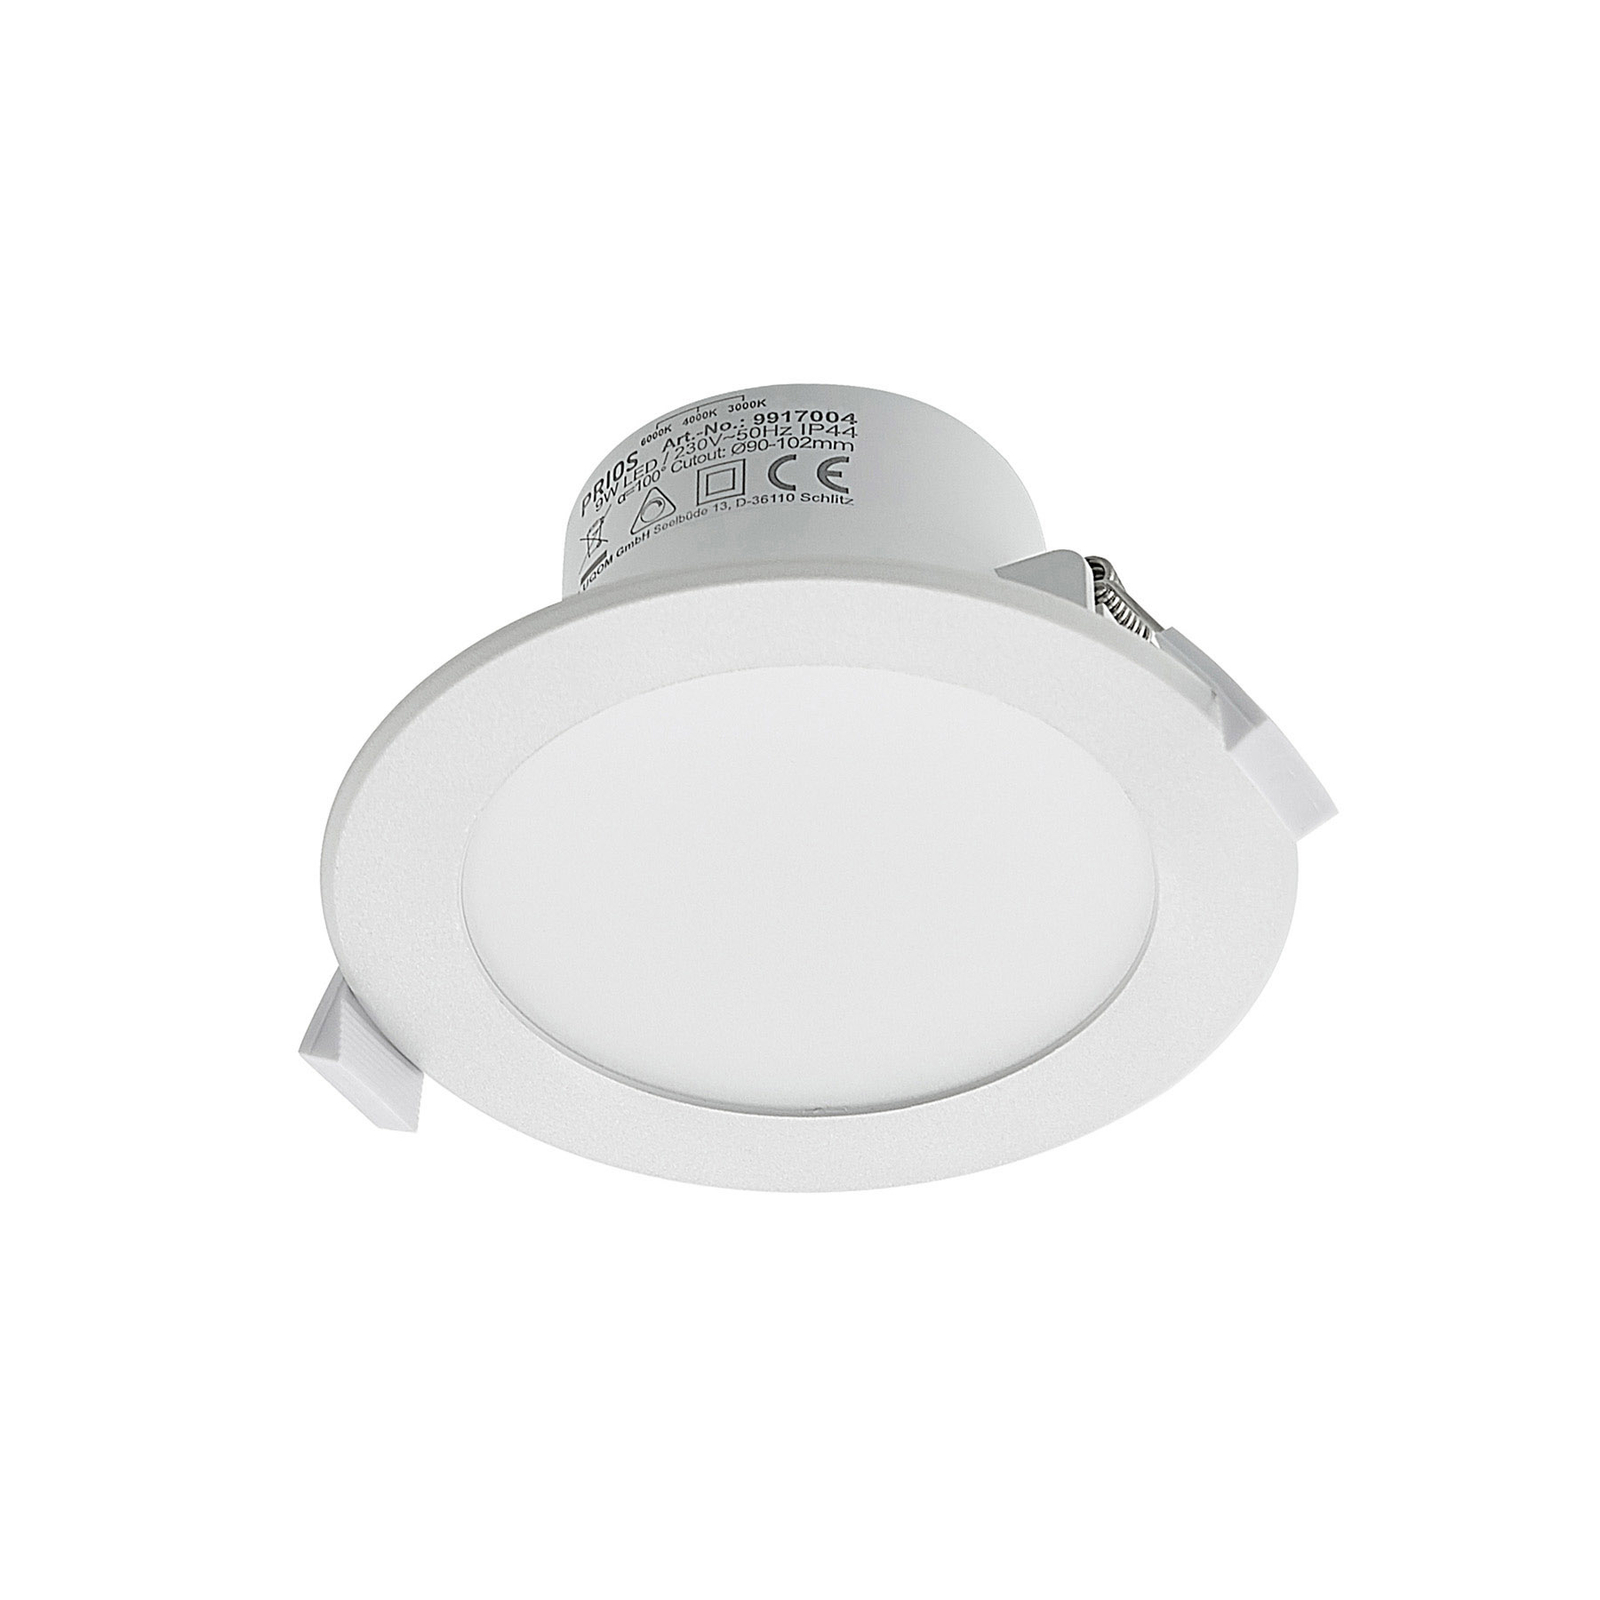 Prios LED recessed light Rida, 11.5cm, 9W, 3pcs, CCT, dimmable